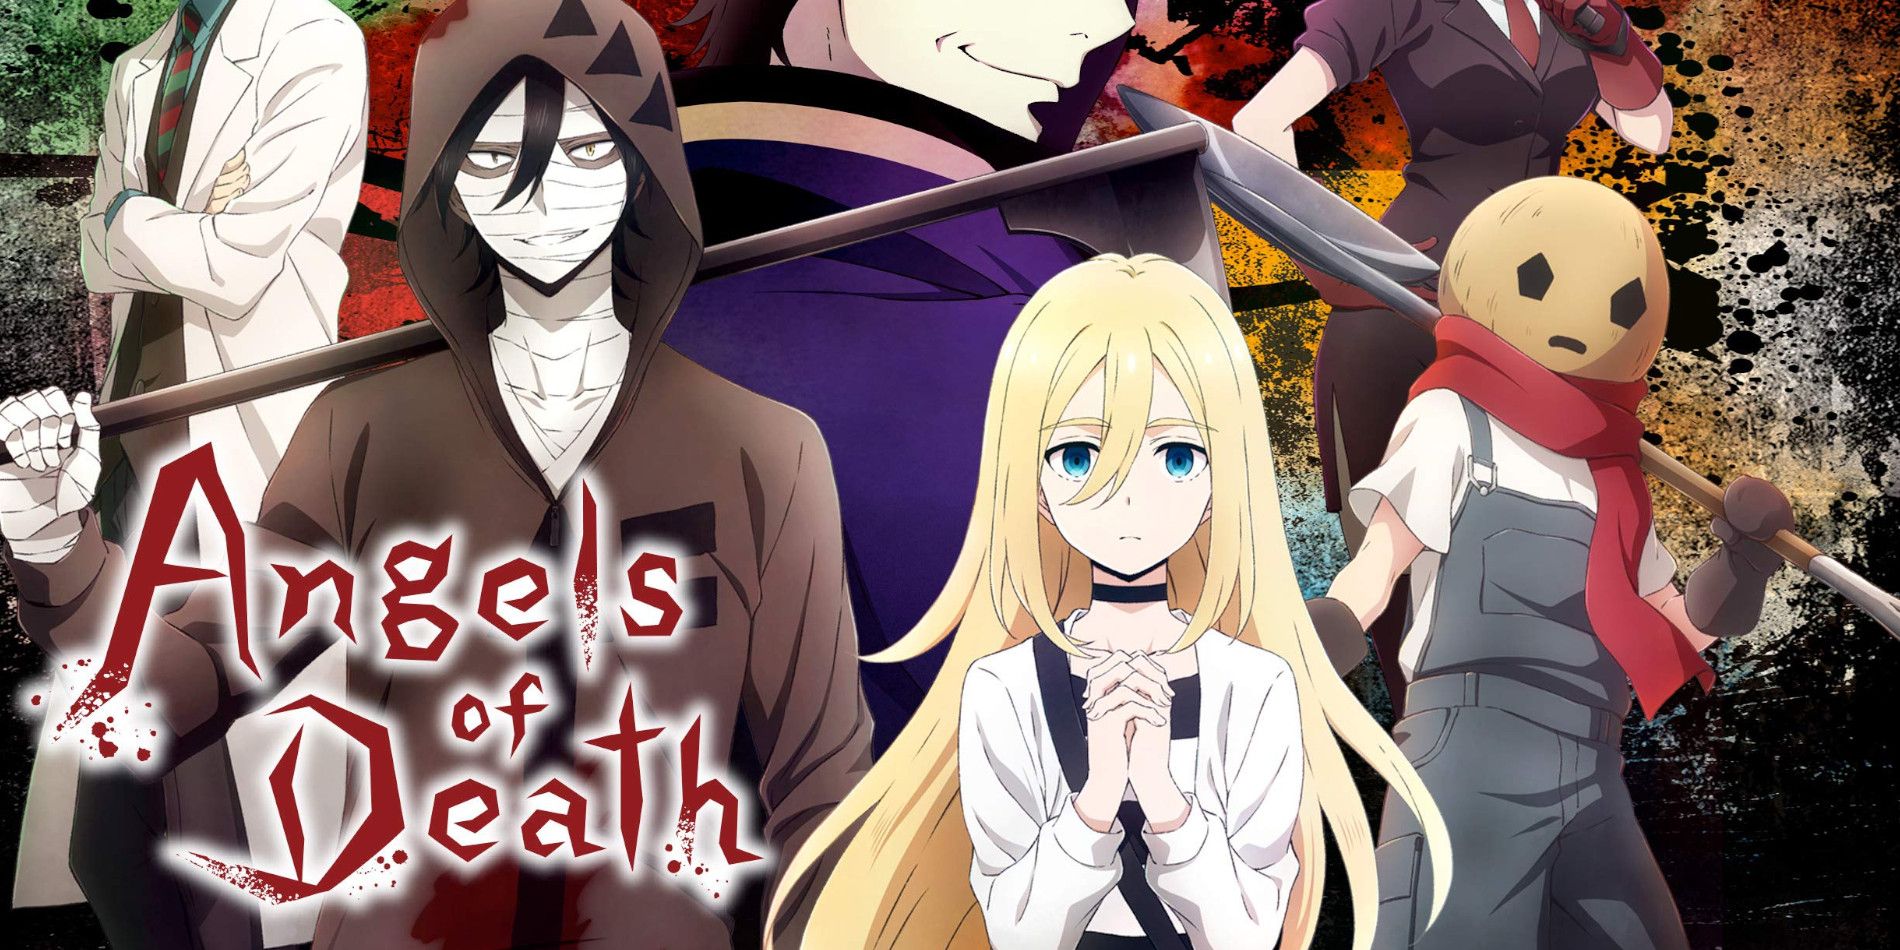 100+] Angels Of Death Background s | Wallpapers.com